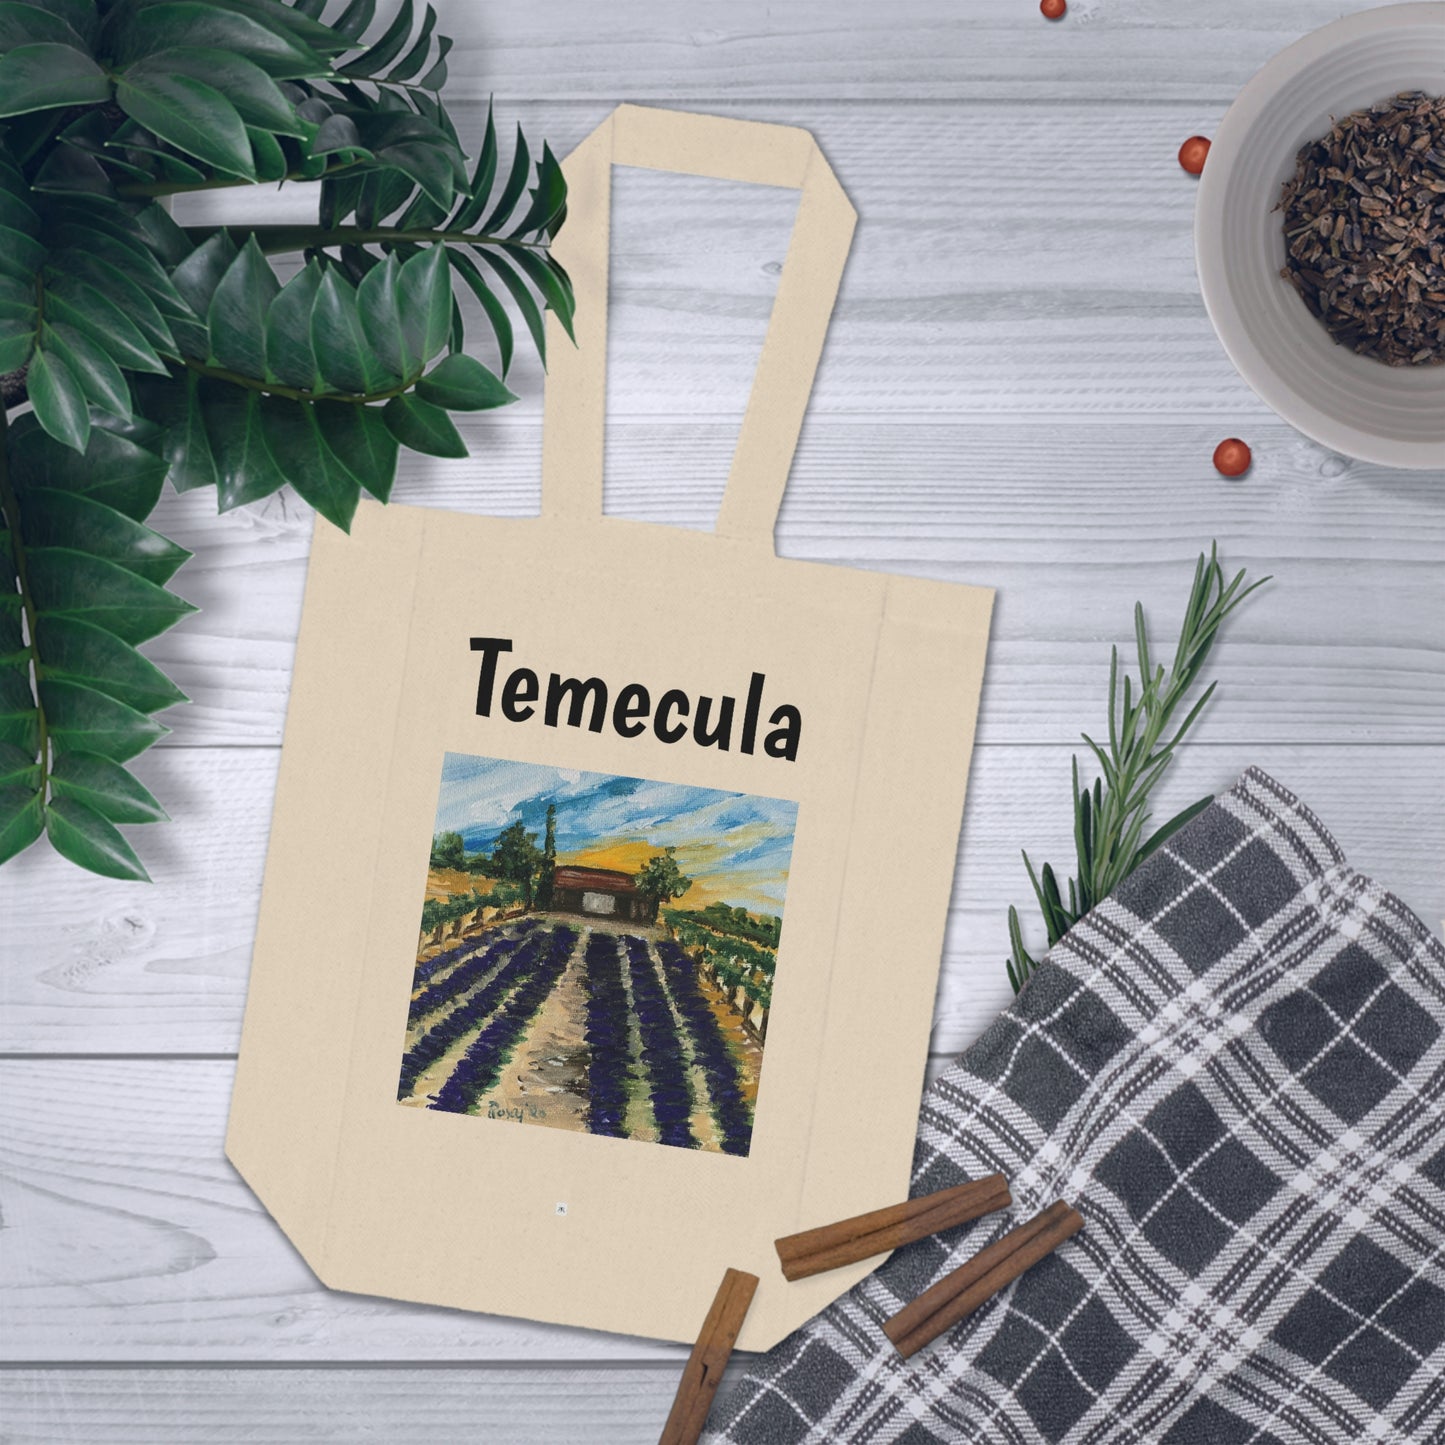 Temecula Double Wine Tote Bag featuring "Temecula Lavender Farm" painting